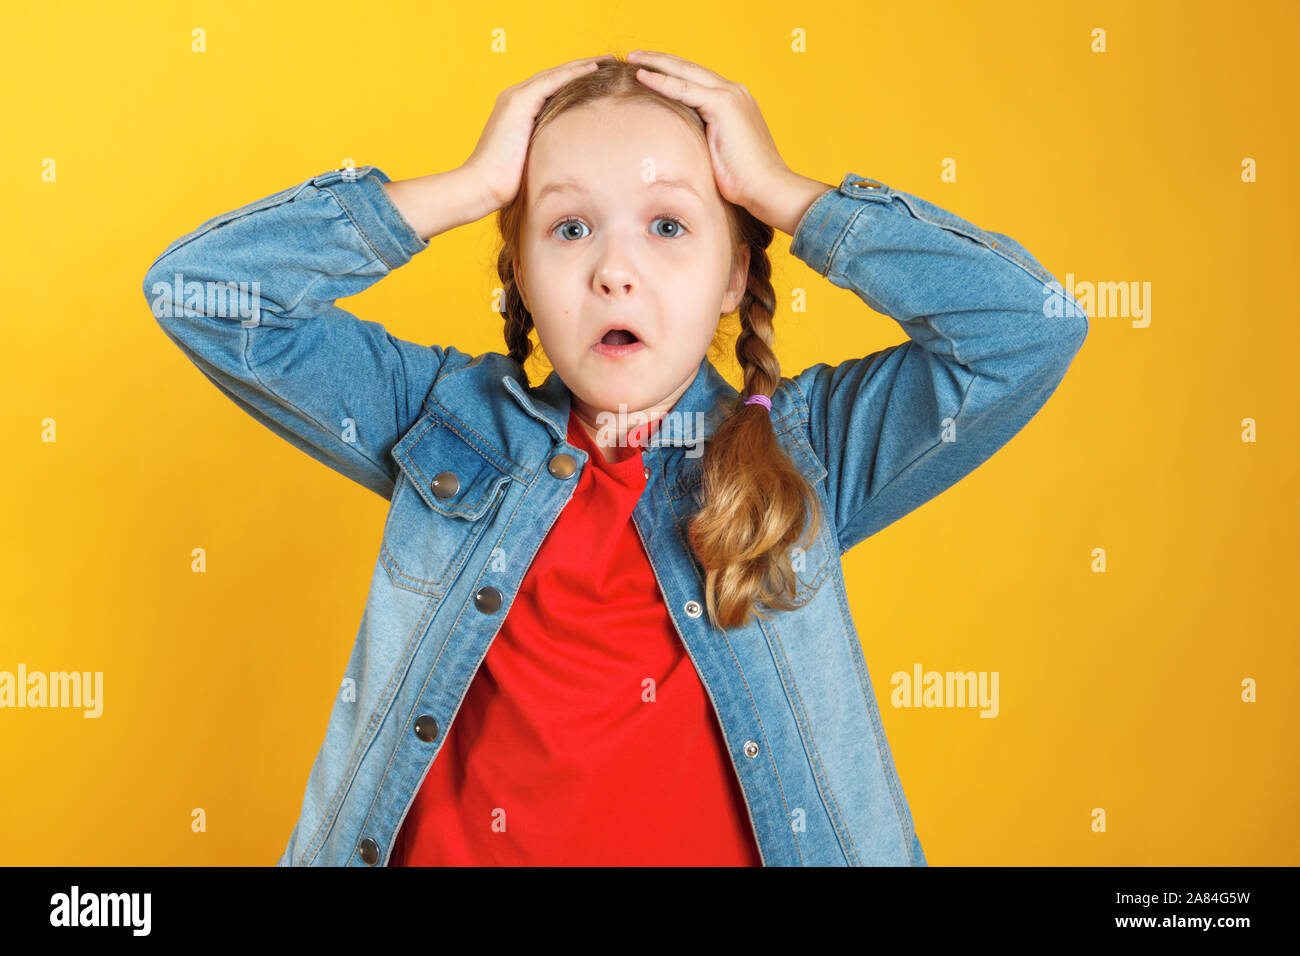 Funny little girl holds hands behind her head on a yellow background. The child is amazed, surprised, emotional. Stock Photo